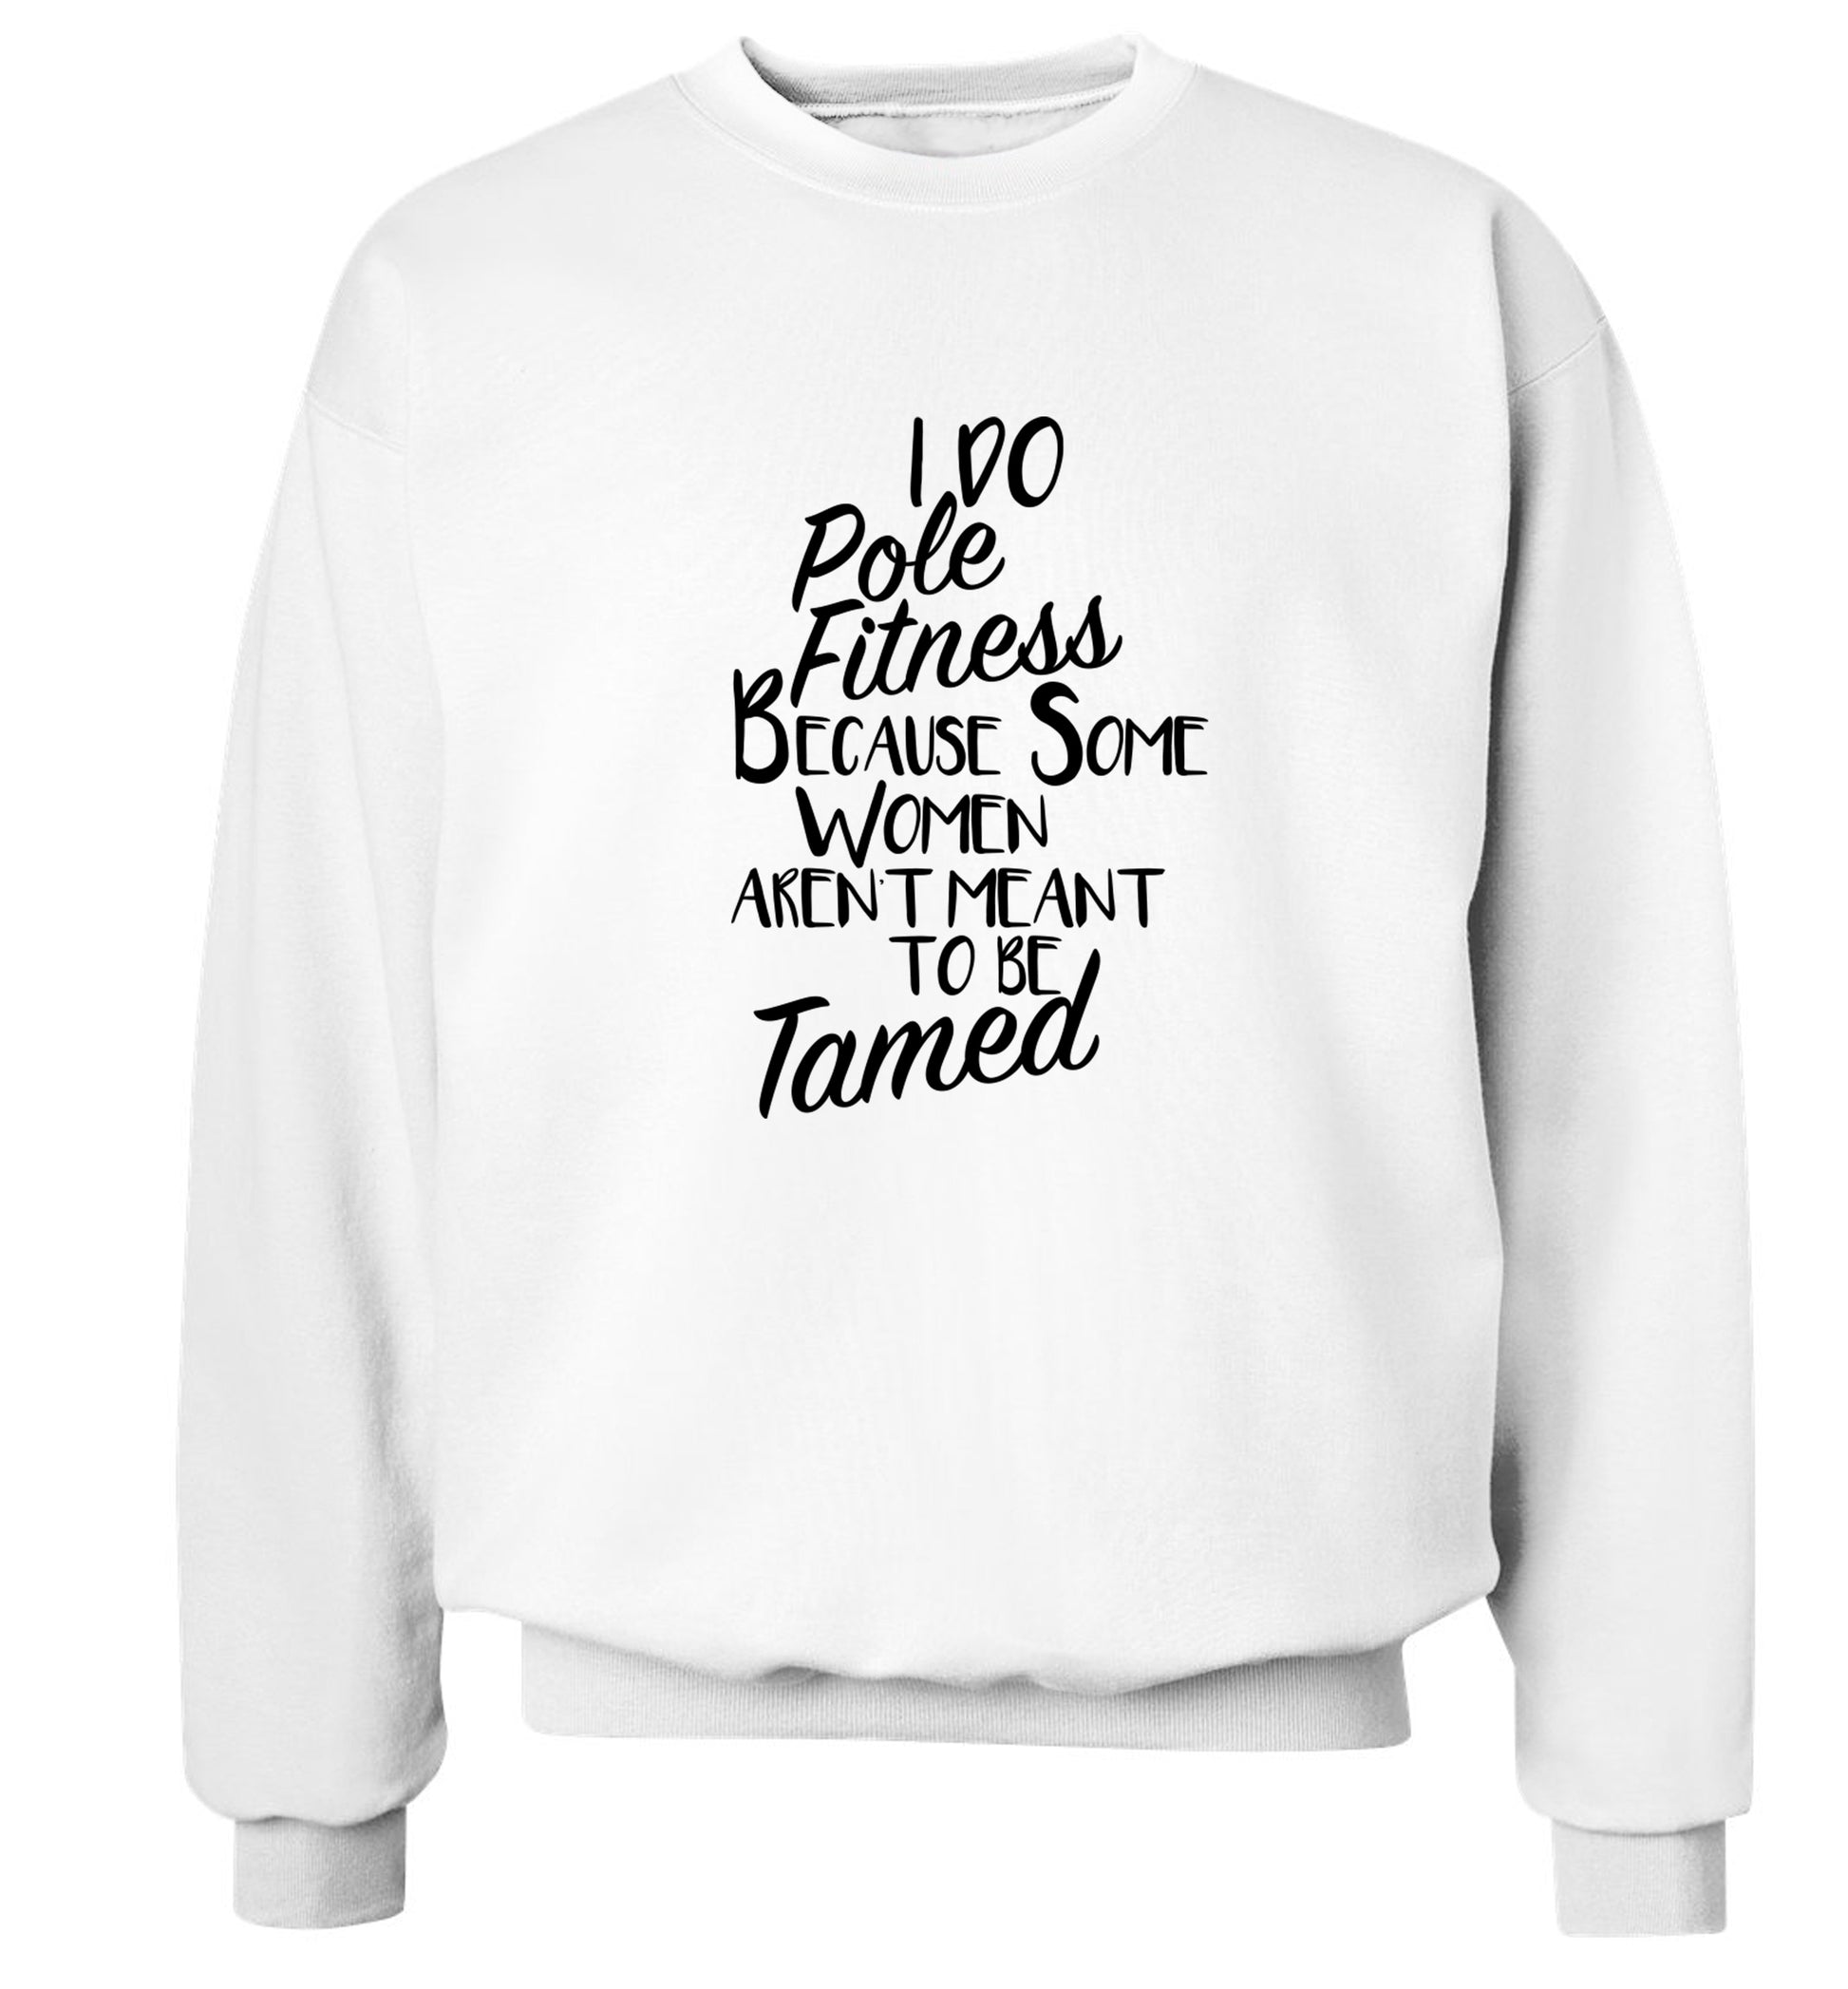 I do pole fitness because some women aren't meant to be tamed Adult's unisex white Sweater 2XL